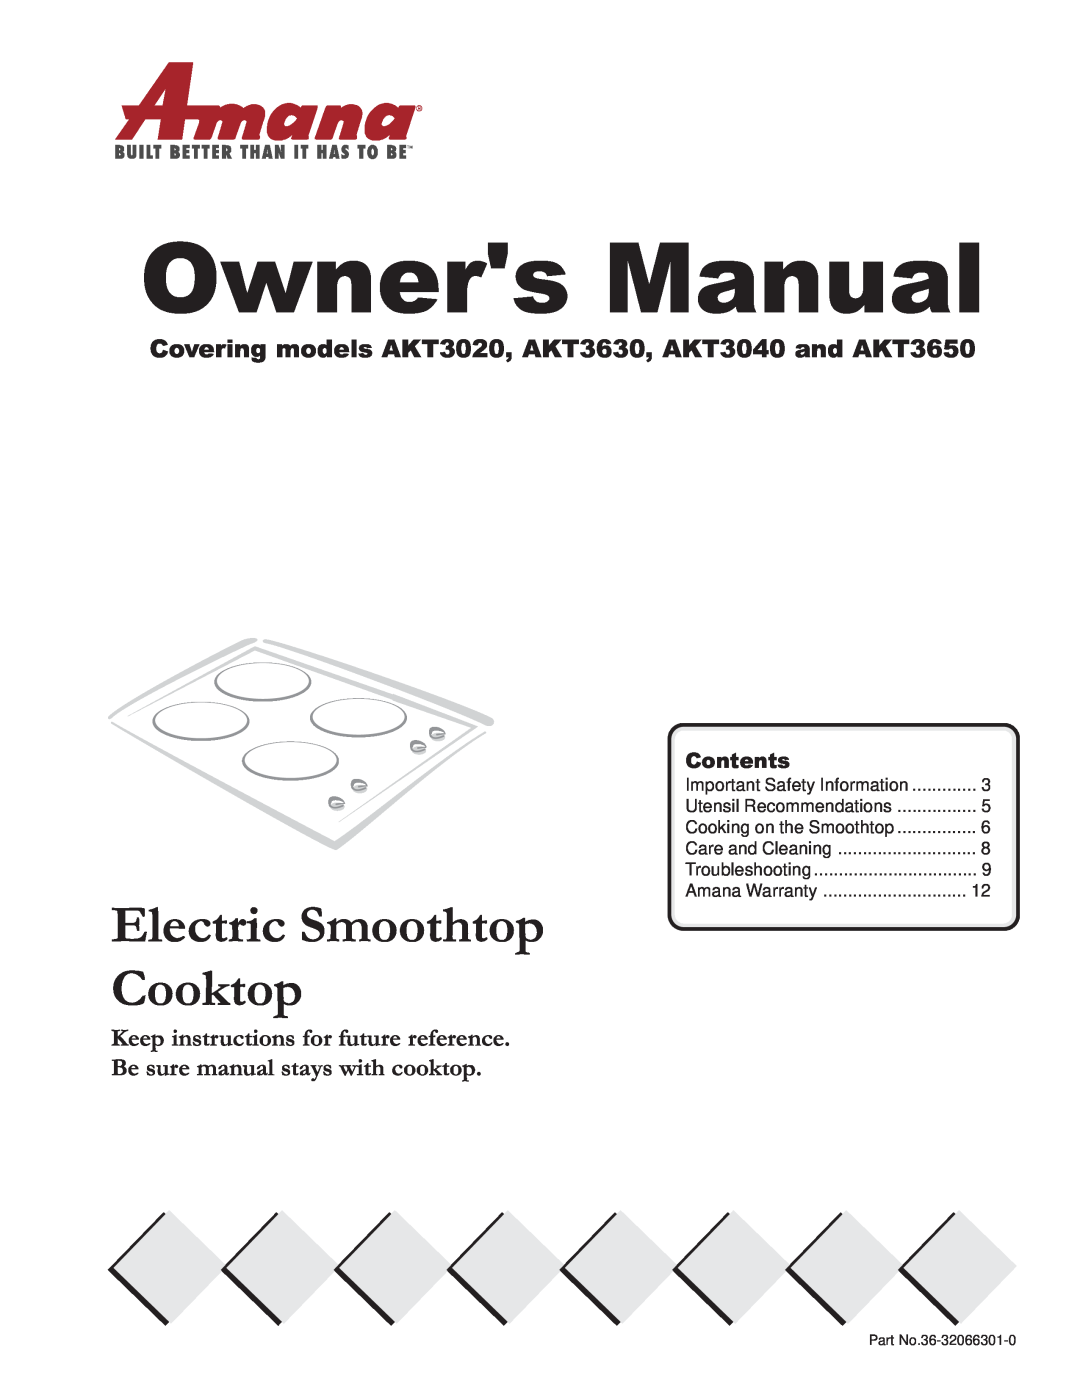 Amana owner manual Covering models AKT3020, AKT3630, AKT3040 and AKT3650, Contents, Electric Smoothtop Cooktop 